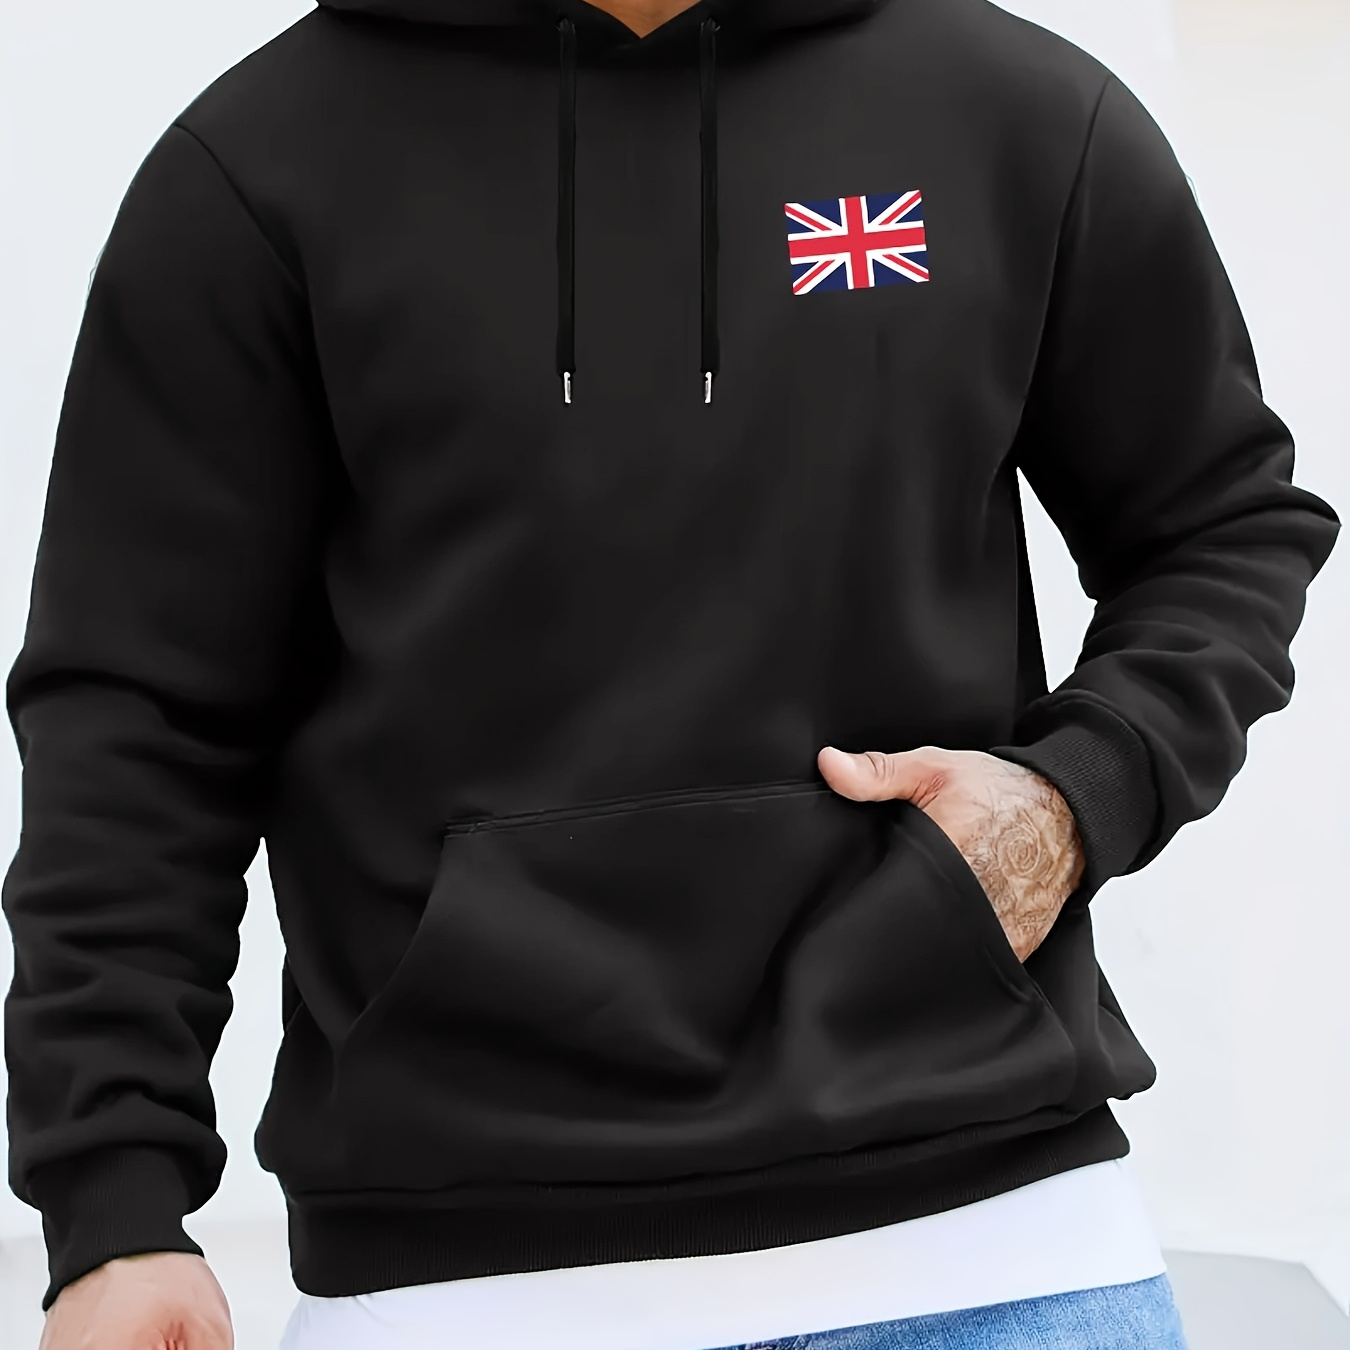 

Uk National Flag Print Hoodie, Cool Sweatshirt For Men, Men's Casual Hooded Pullover Streetwear Clothing For Spring Fall Winter, As Gifts